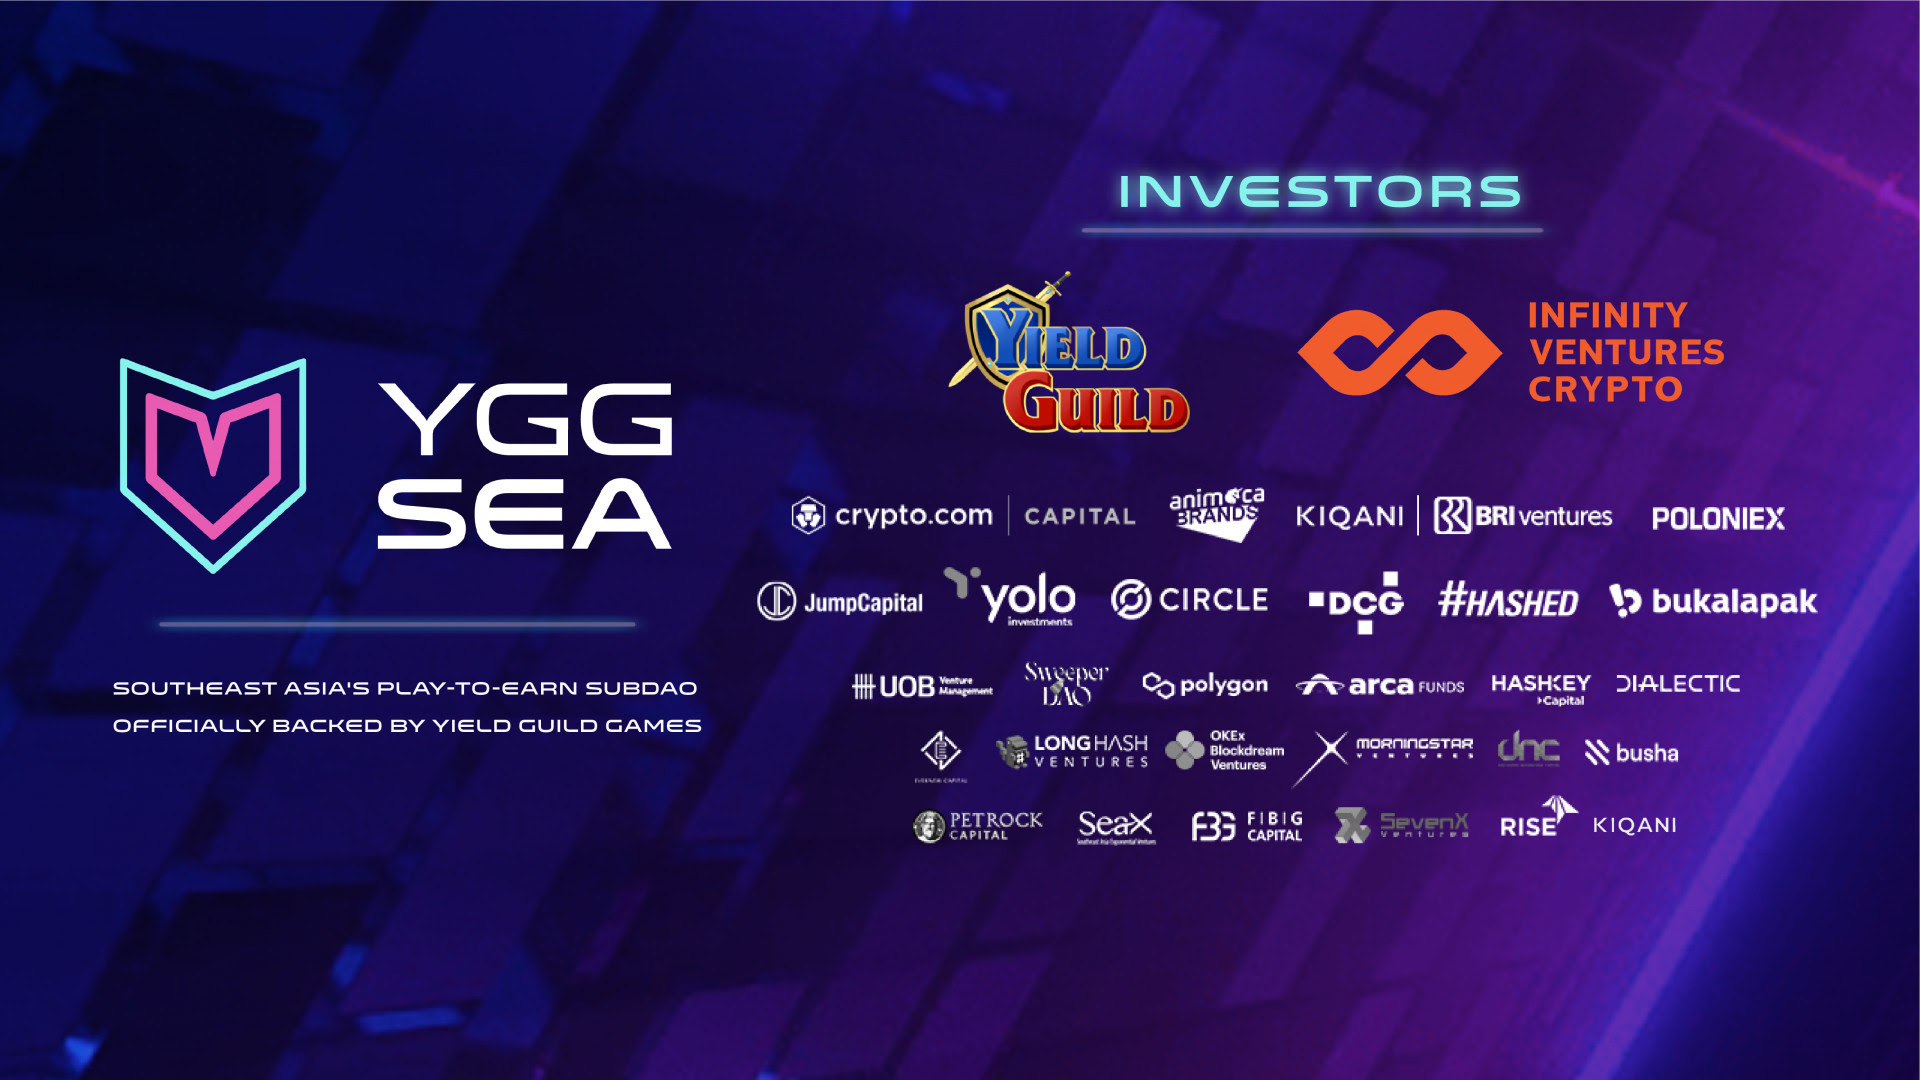 YGG SEA Secures $15M to Boost the Adoption of Play-to-Earn Gaming in Southeast Asian Countries